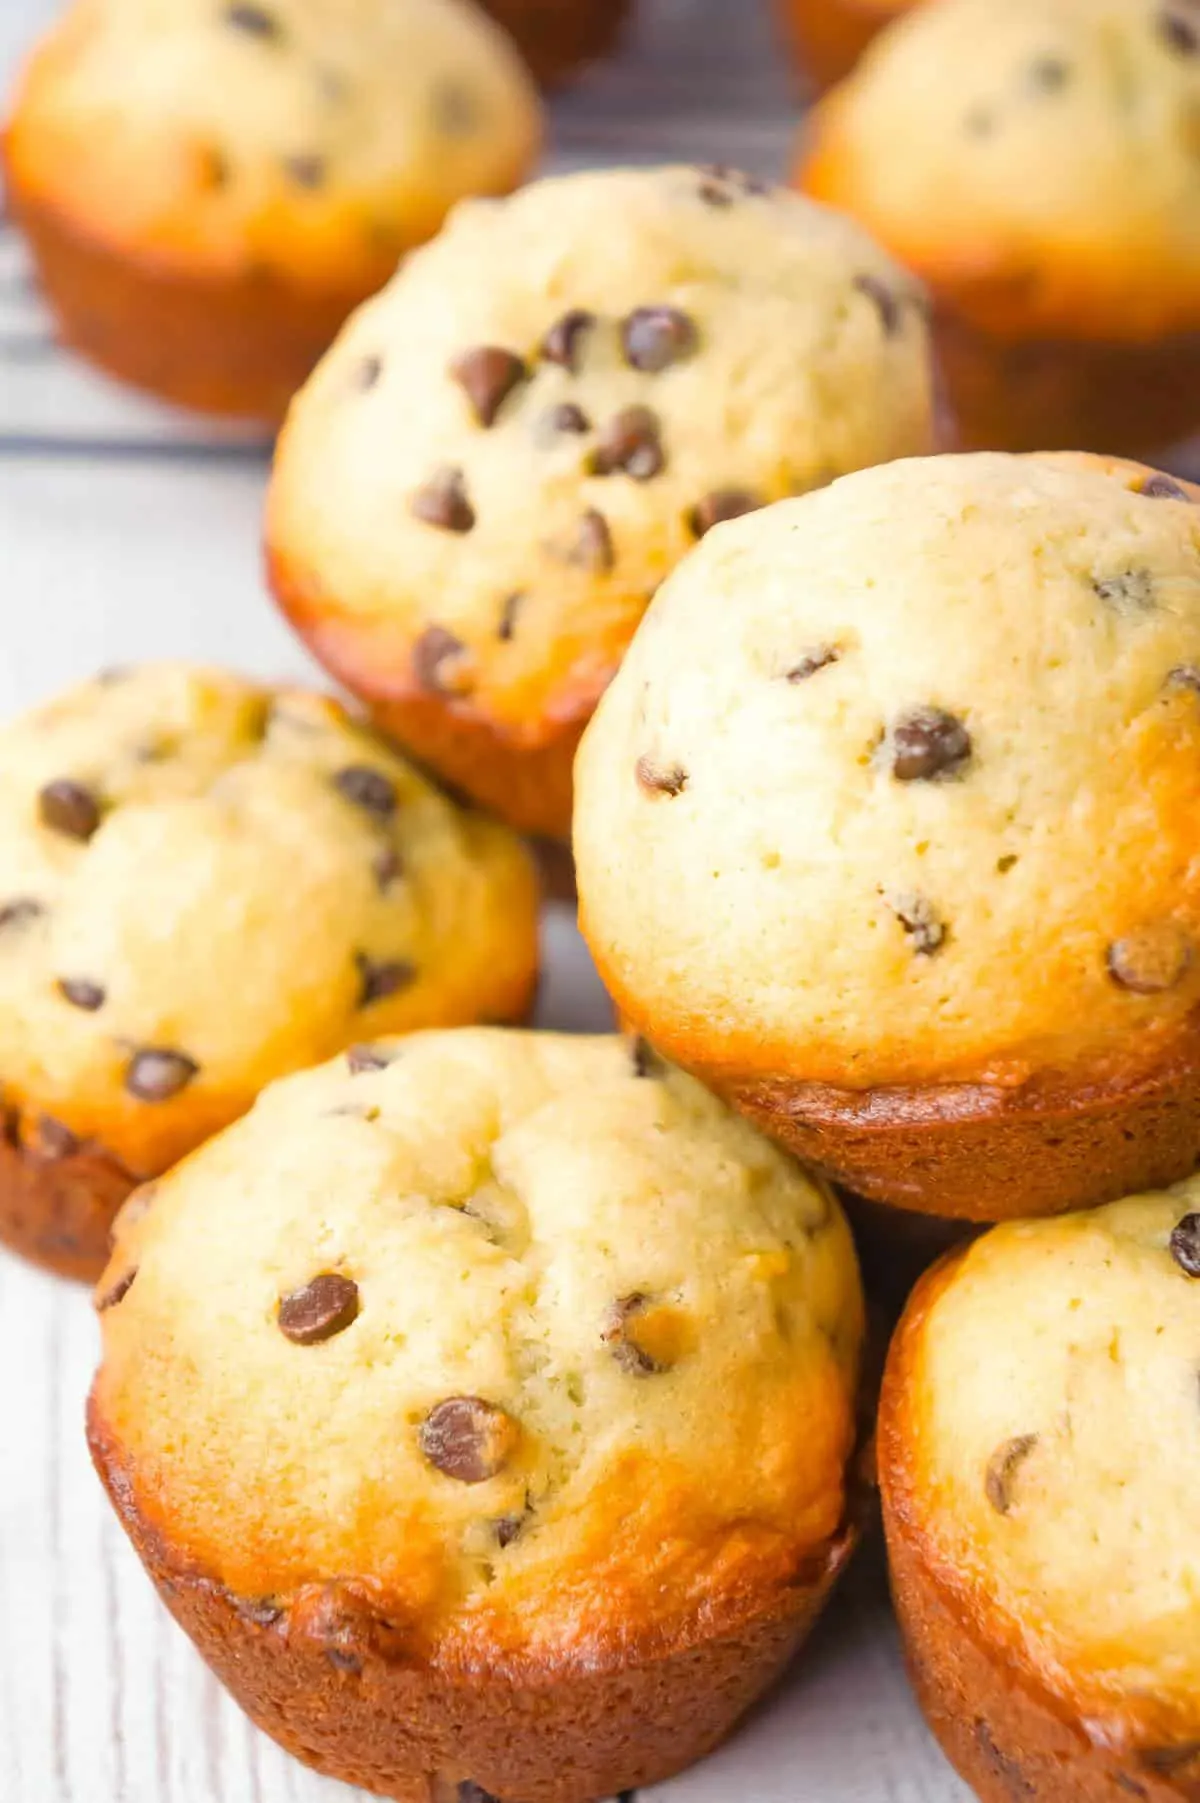 Chocolate Chip Banana Muffins are an easy breakfast or snack recipe made from ripe bananas and loaded with mini semi sweet chocolate chips.